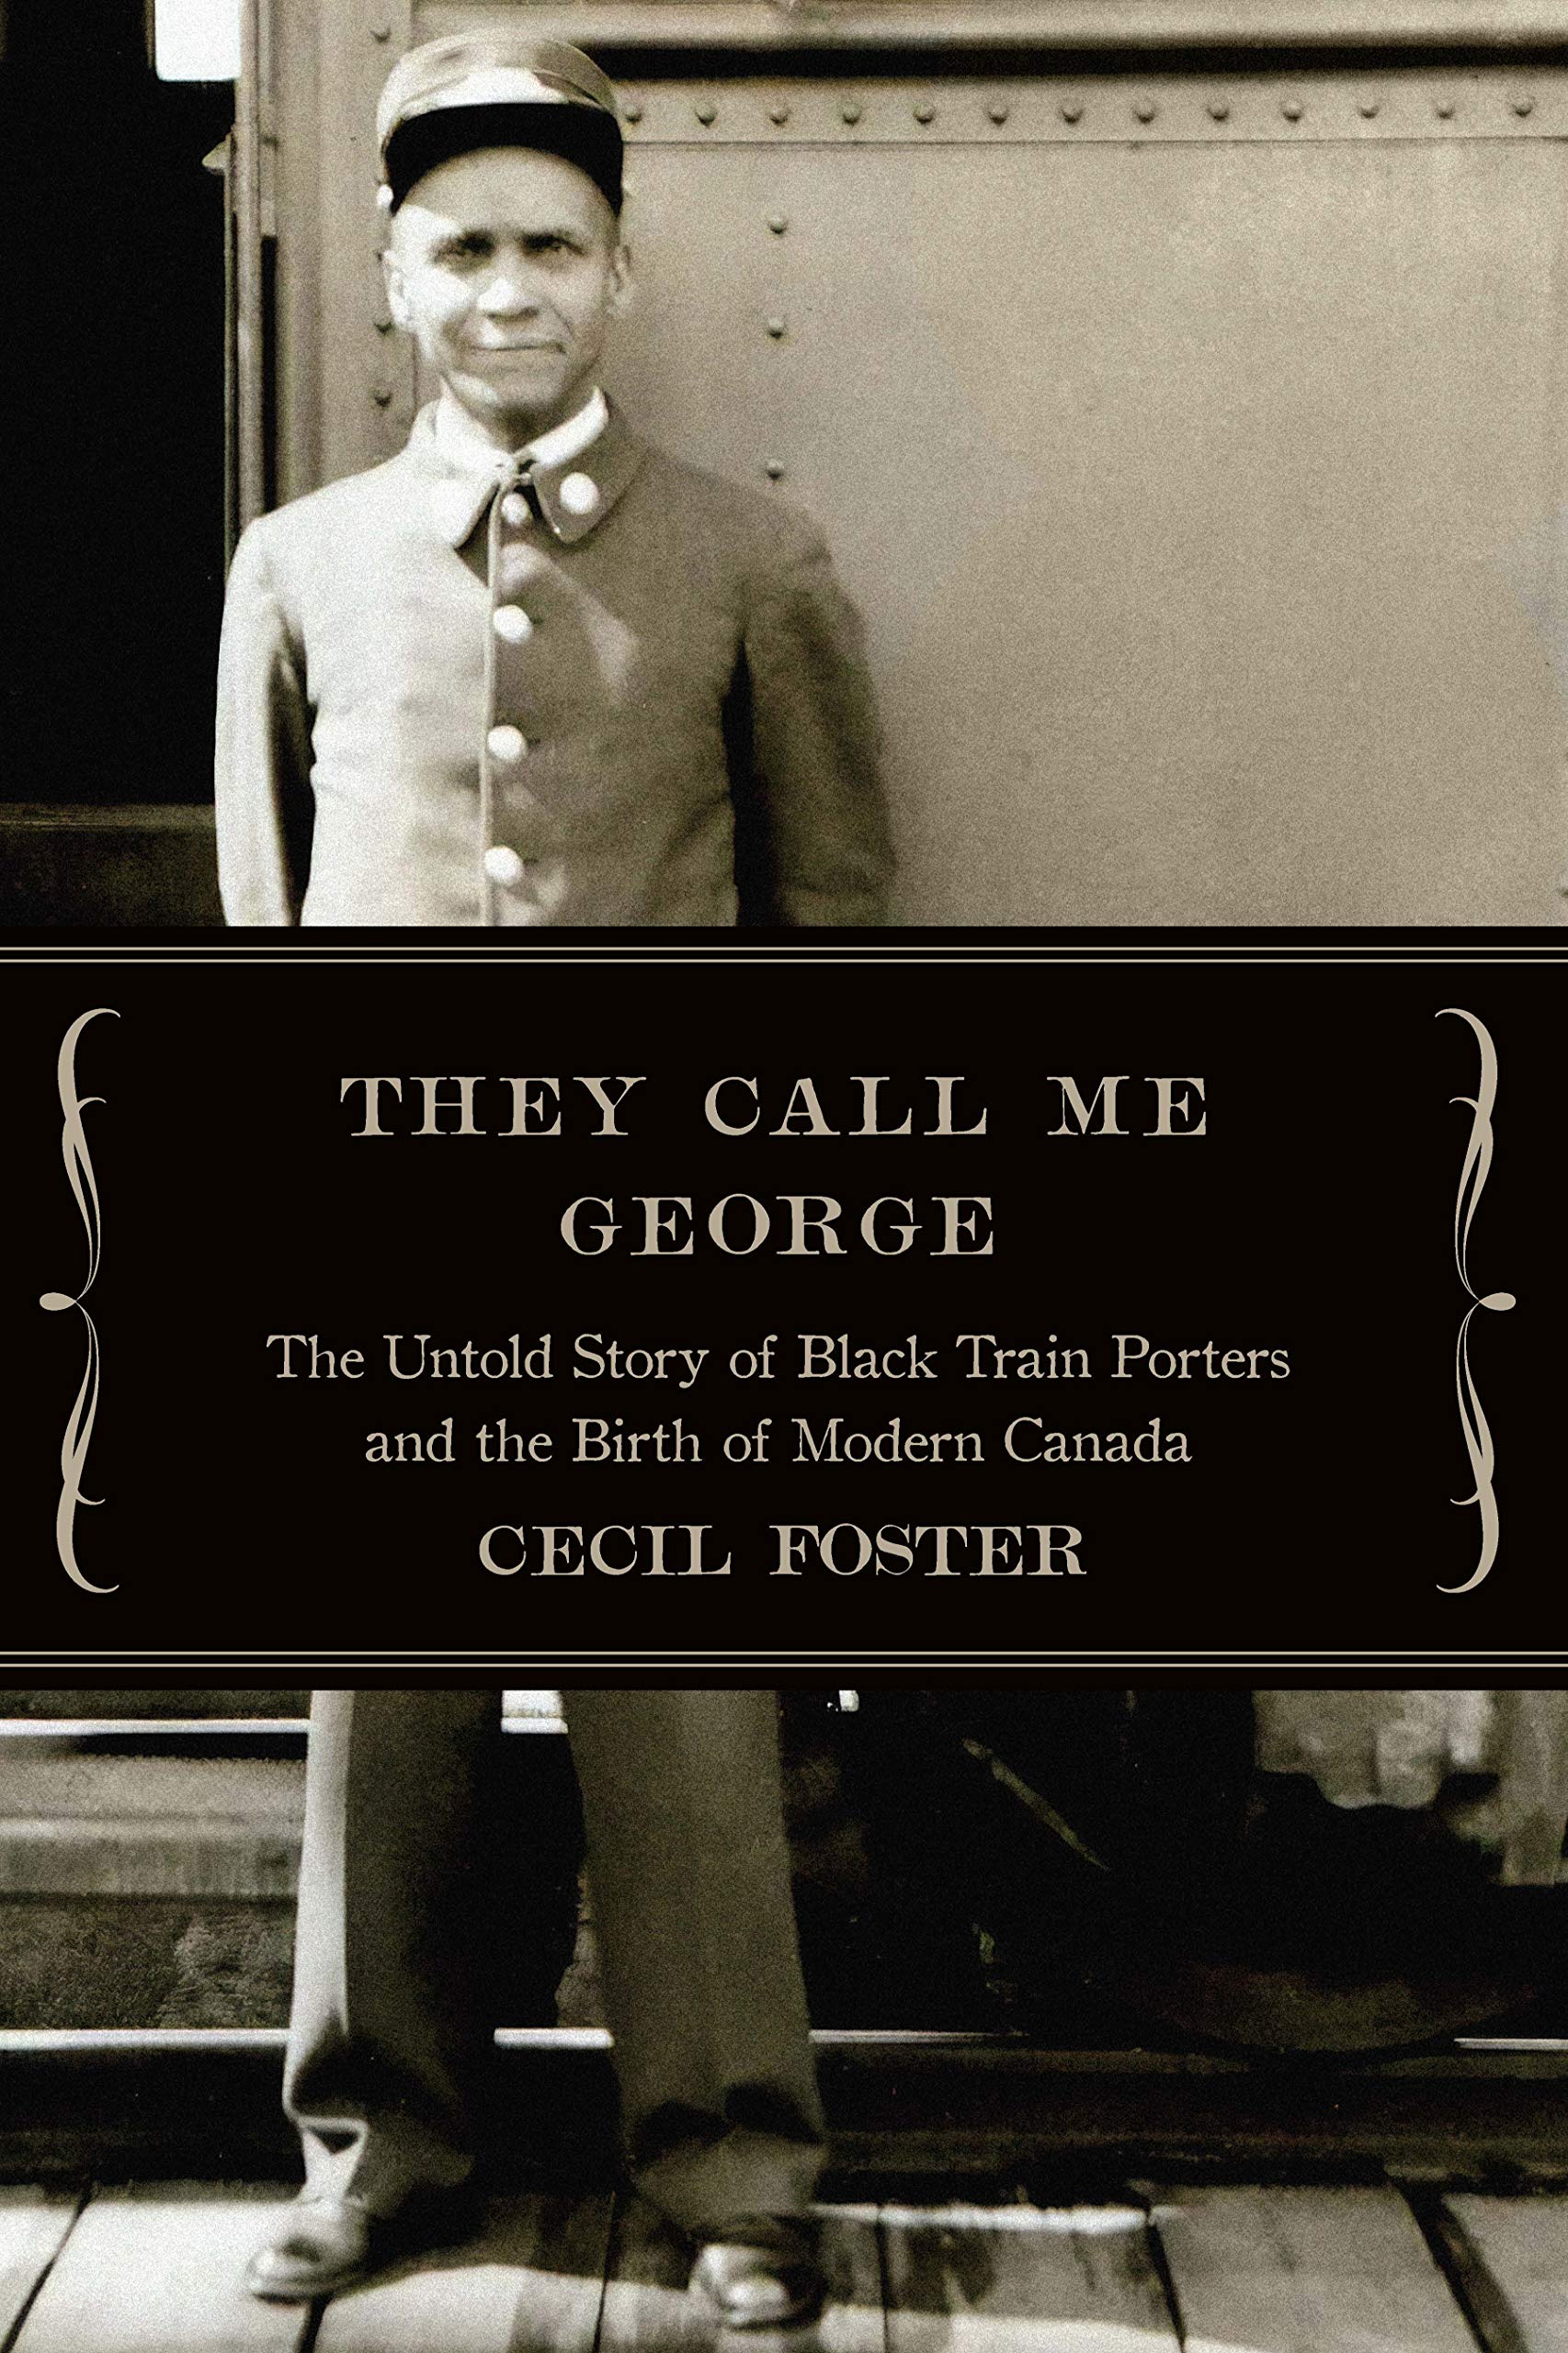 They call me George: the untold story of black train porters and the birth of modern Canada by Cecil Foster